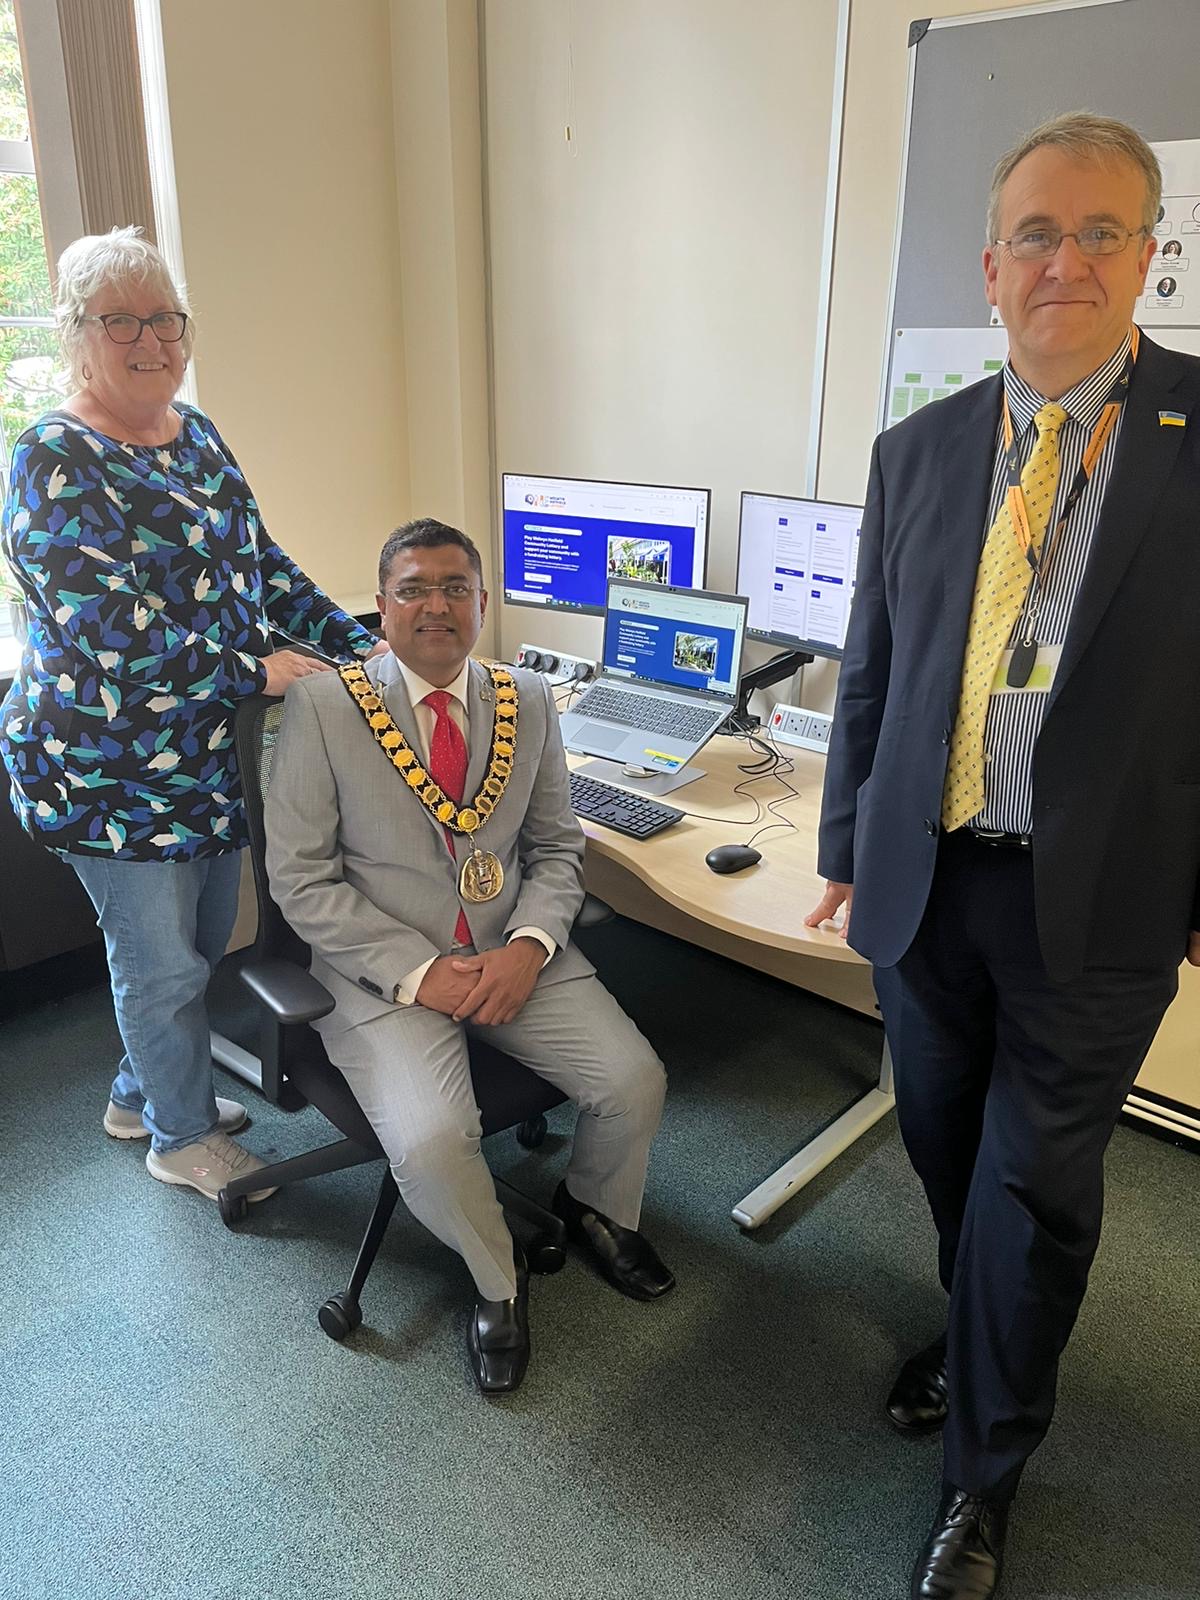 Cllr&#039;s sitting next to a computer with the lottery website on the screen.